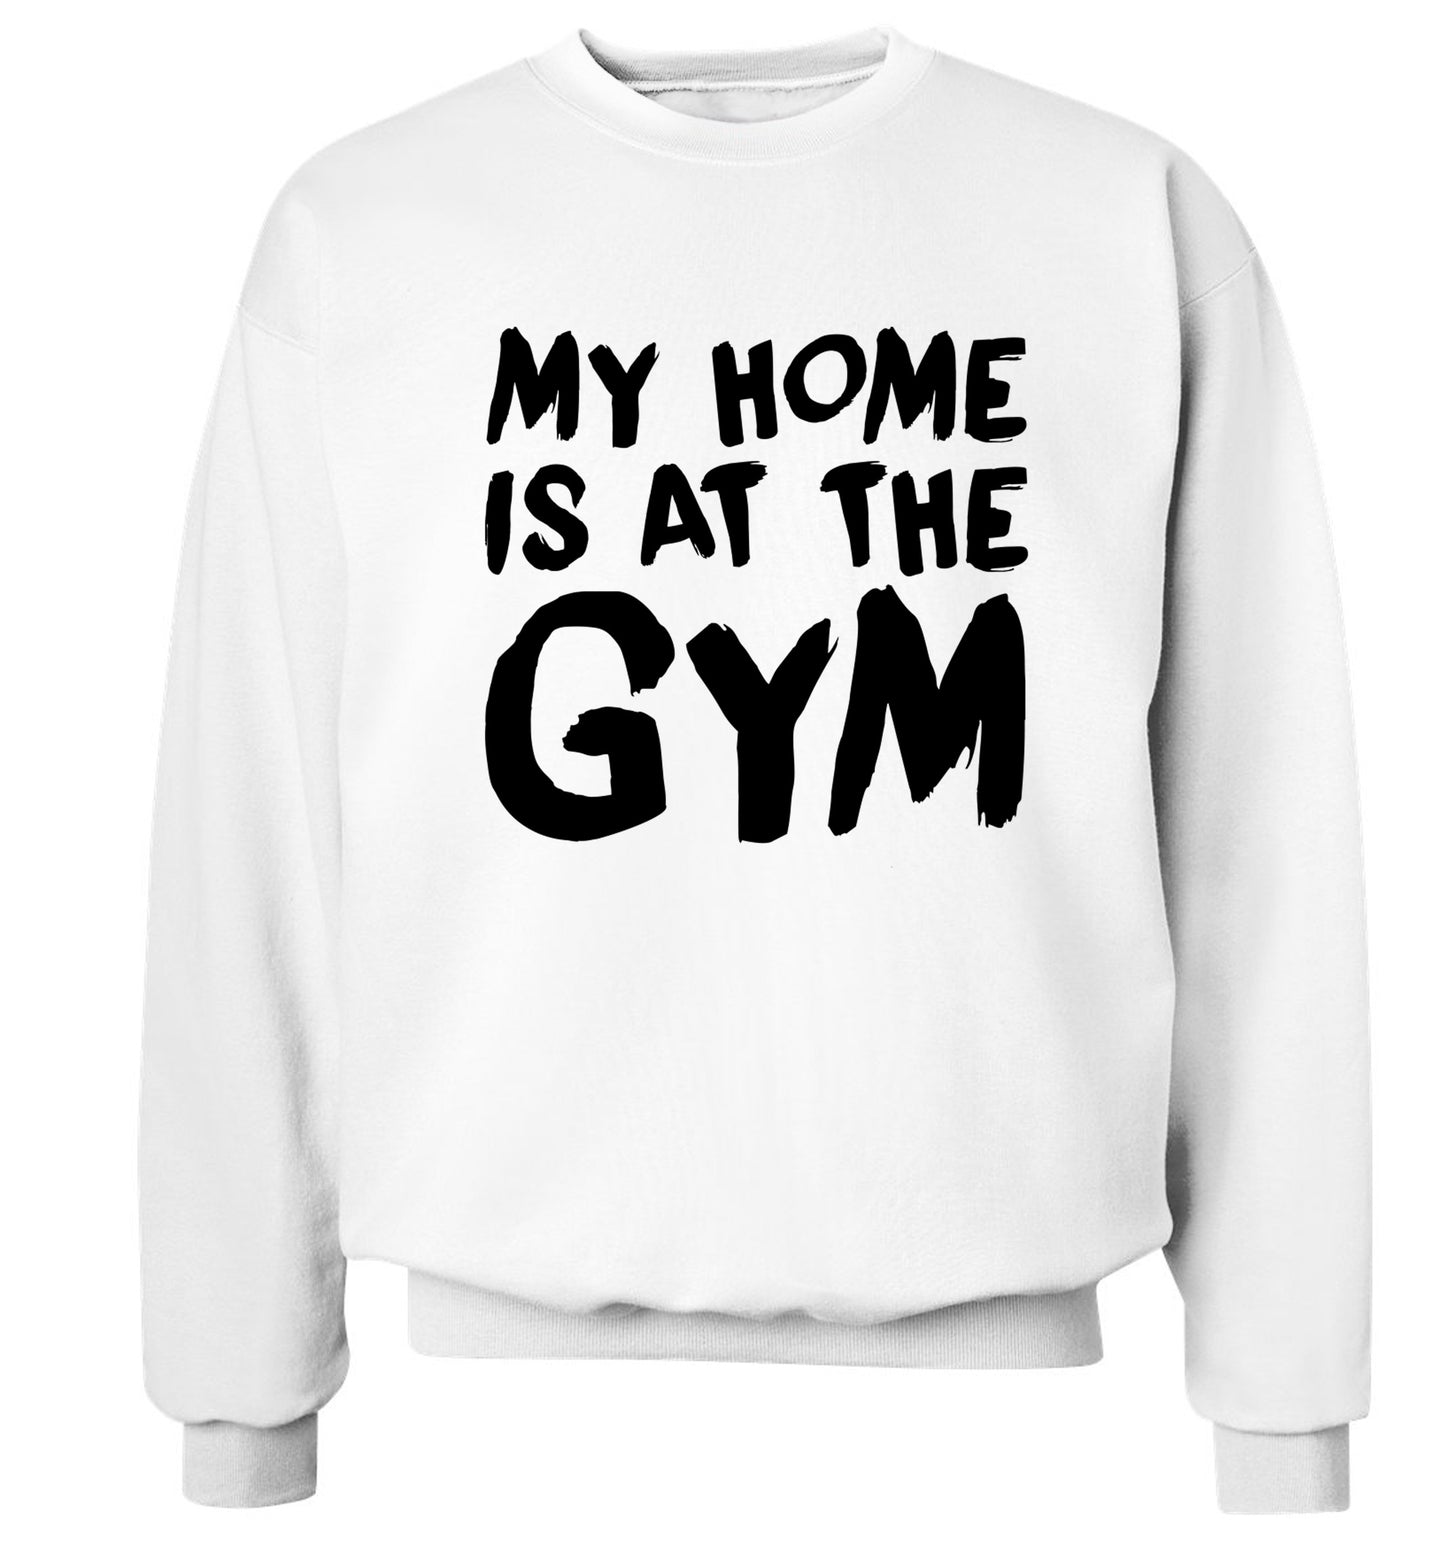 My home is at the gym Adult's unisex white Sweater 2XL